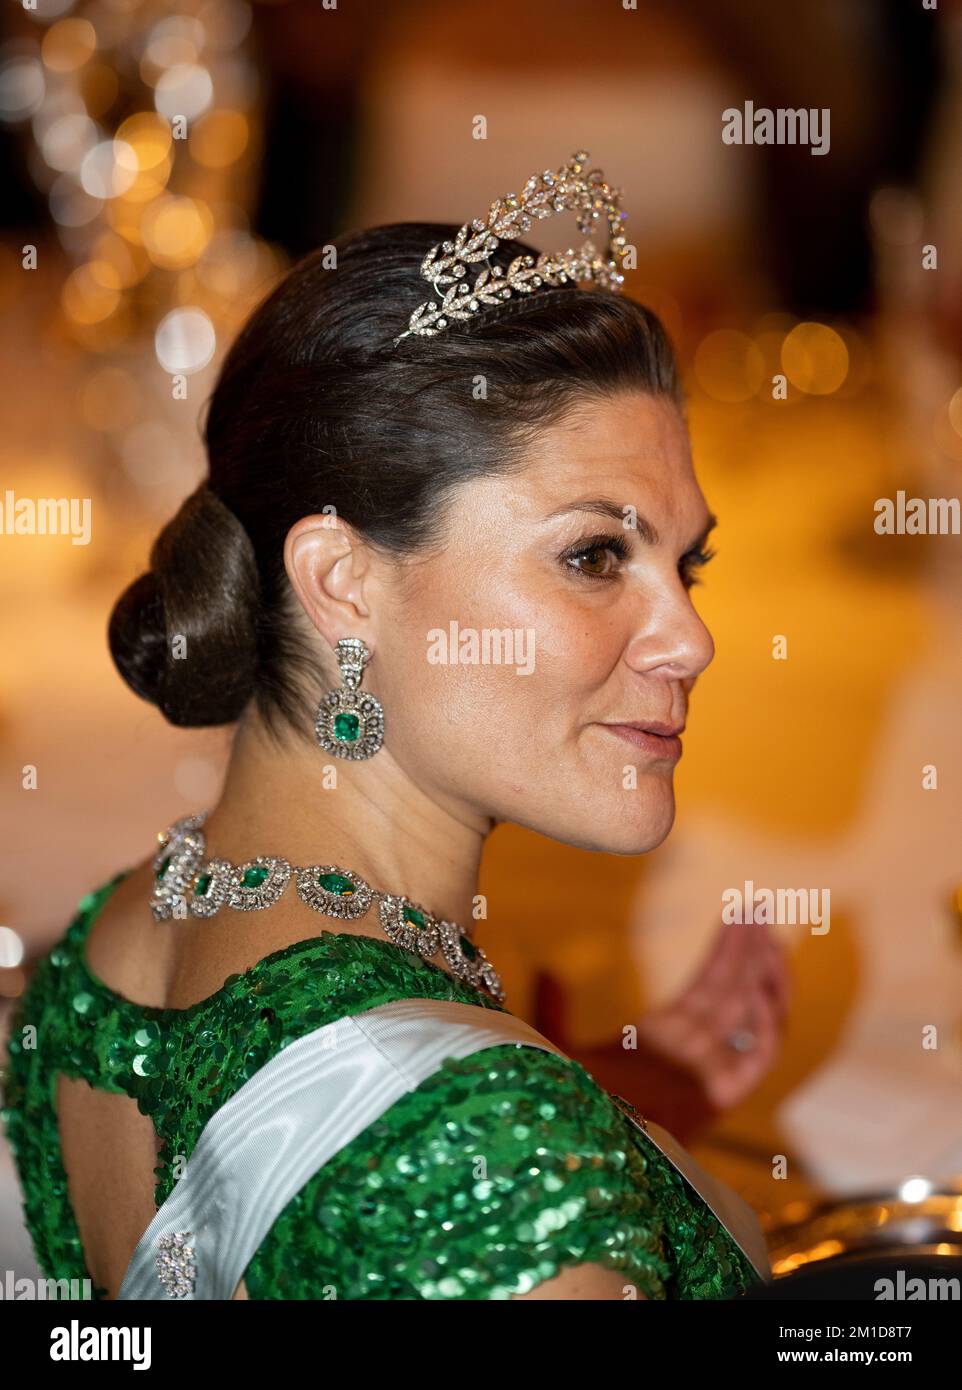 Crown Princess Victoria attends the King's dinner for the Nobel laureates at the Royal Palace in Stockholm, Sweden, 11 December 2022.  Photo: Pontus Lundahl / TT / 10050 Stock Photo